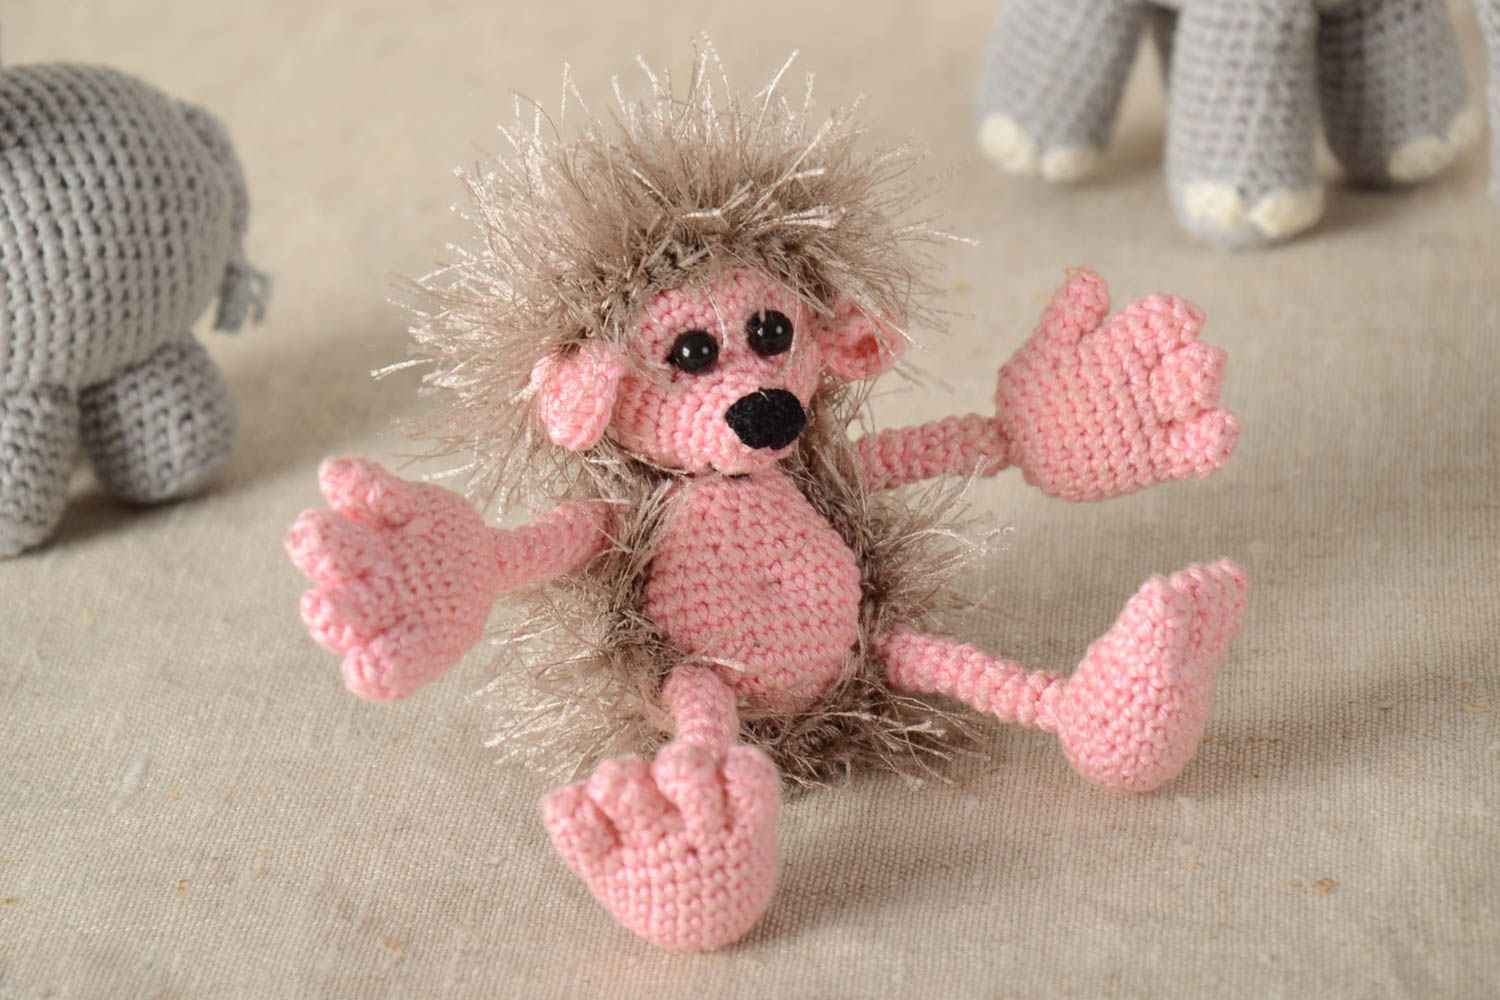 Handmade crocheted toy stylish unusual toy for kids funny hedgehog toy photo 1